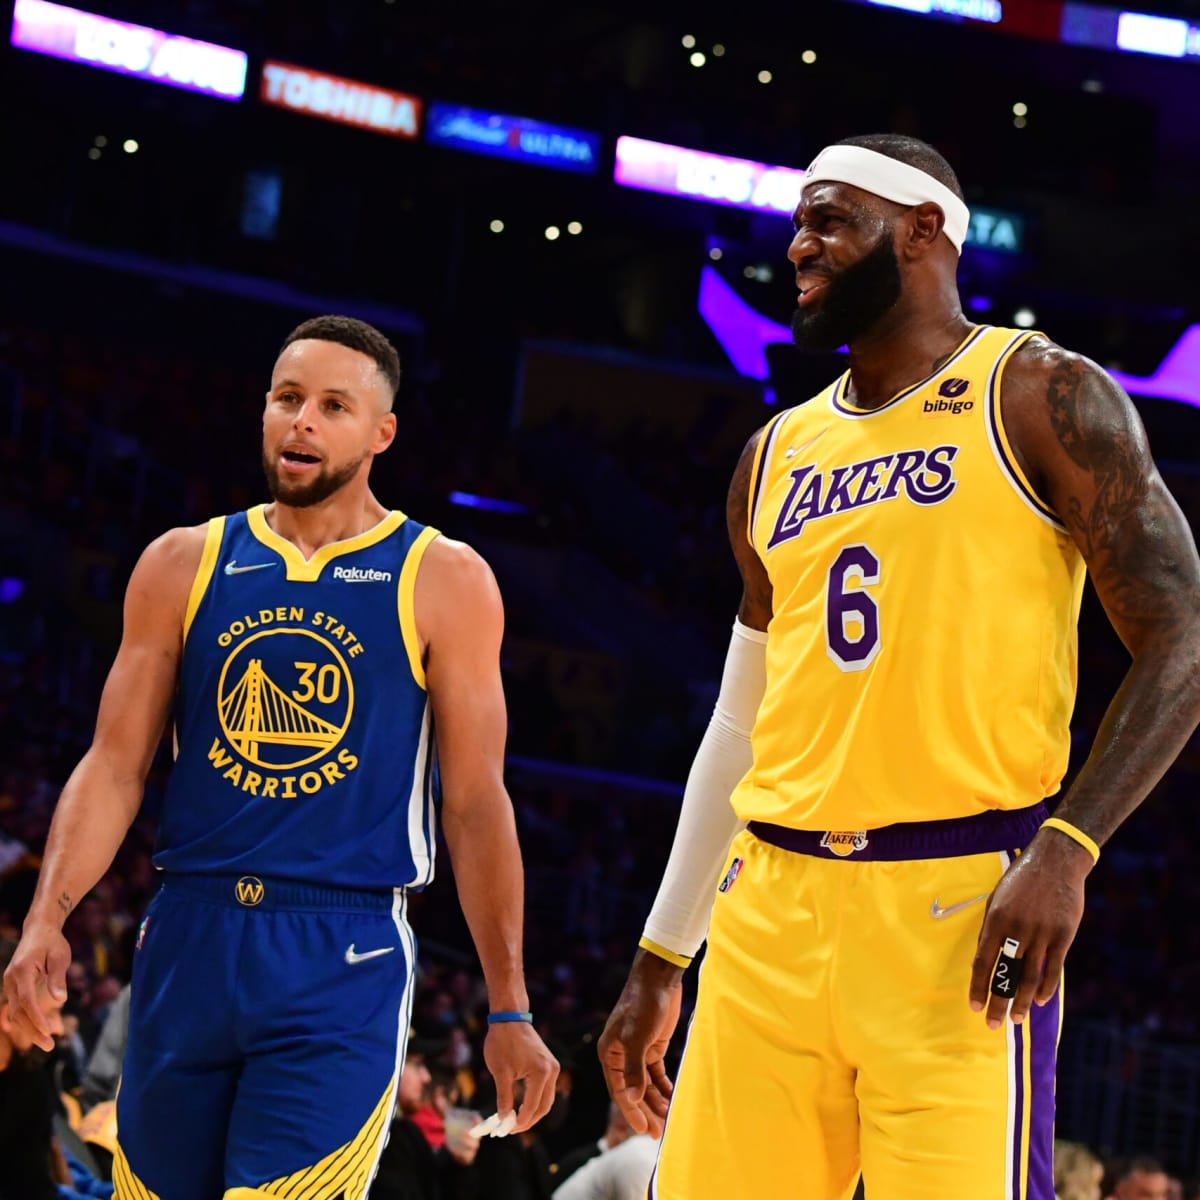 LeBron James and Steph Curry: From admirer to friend to foe